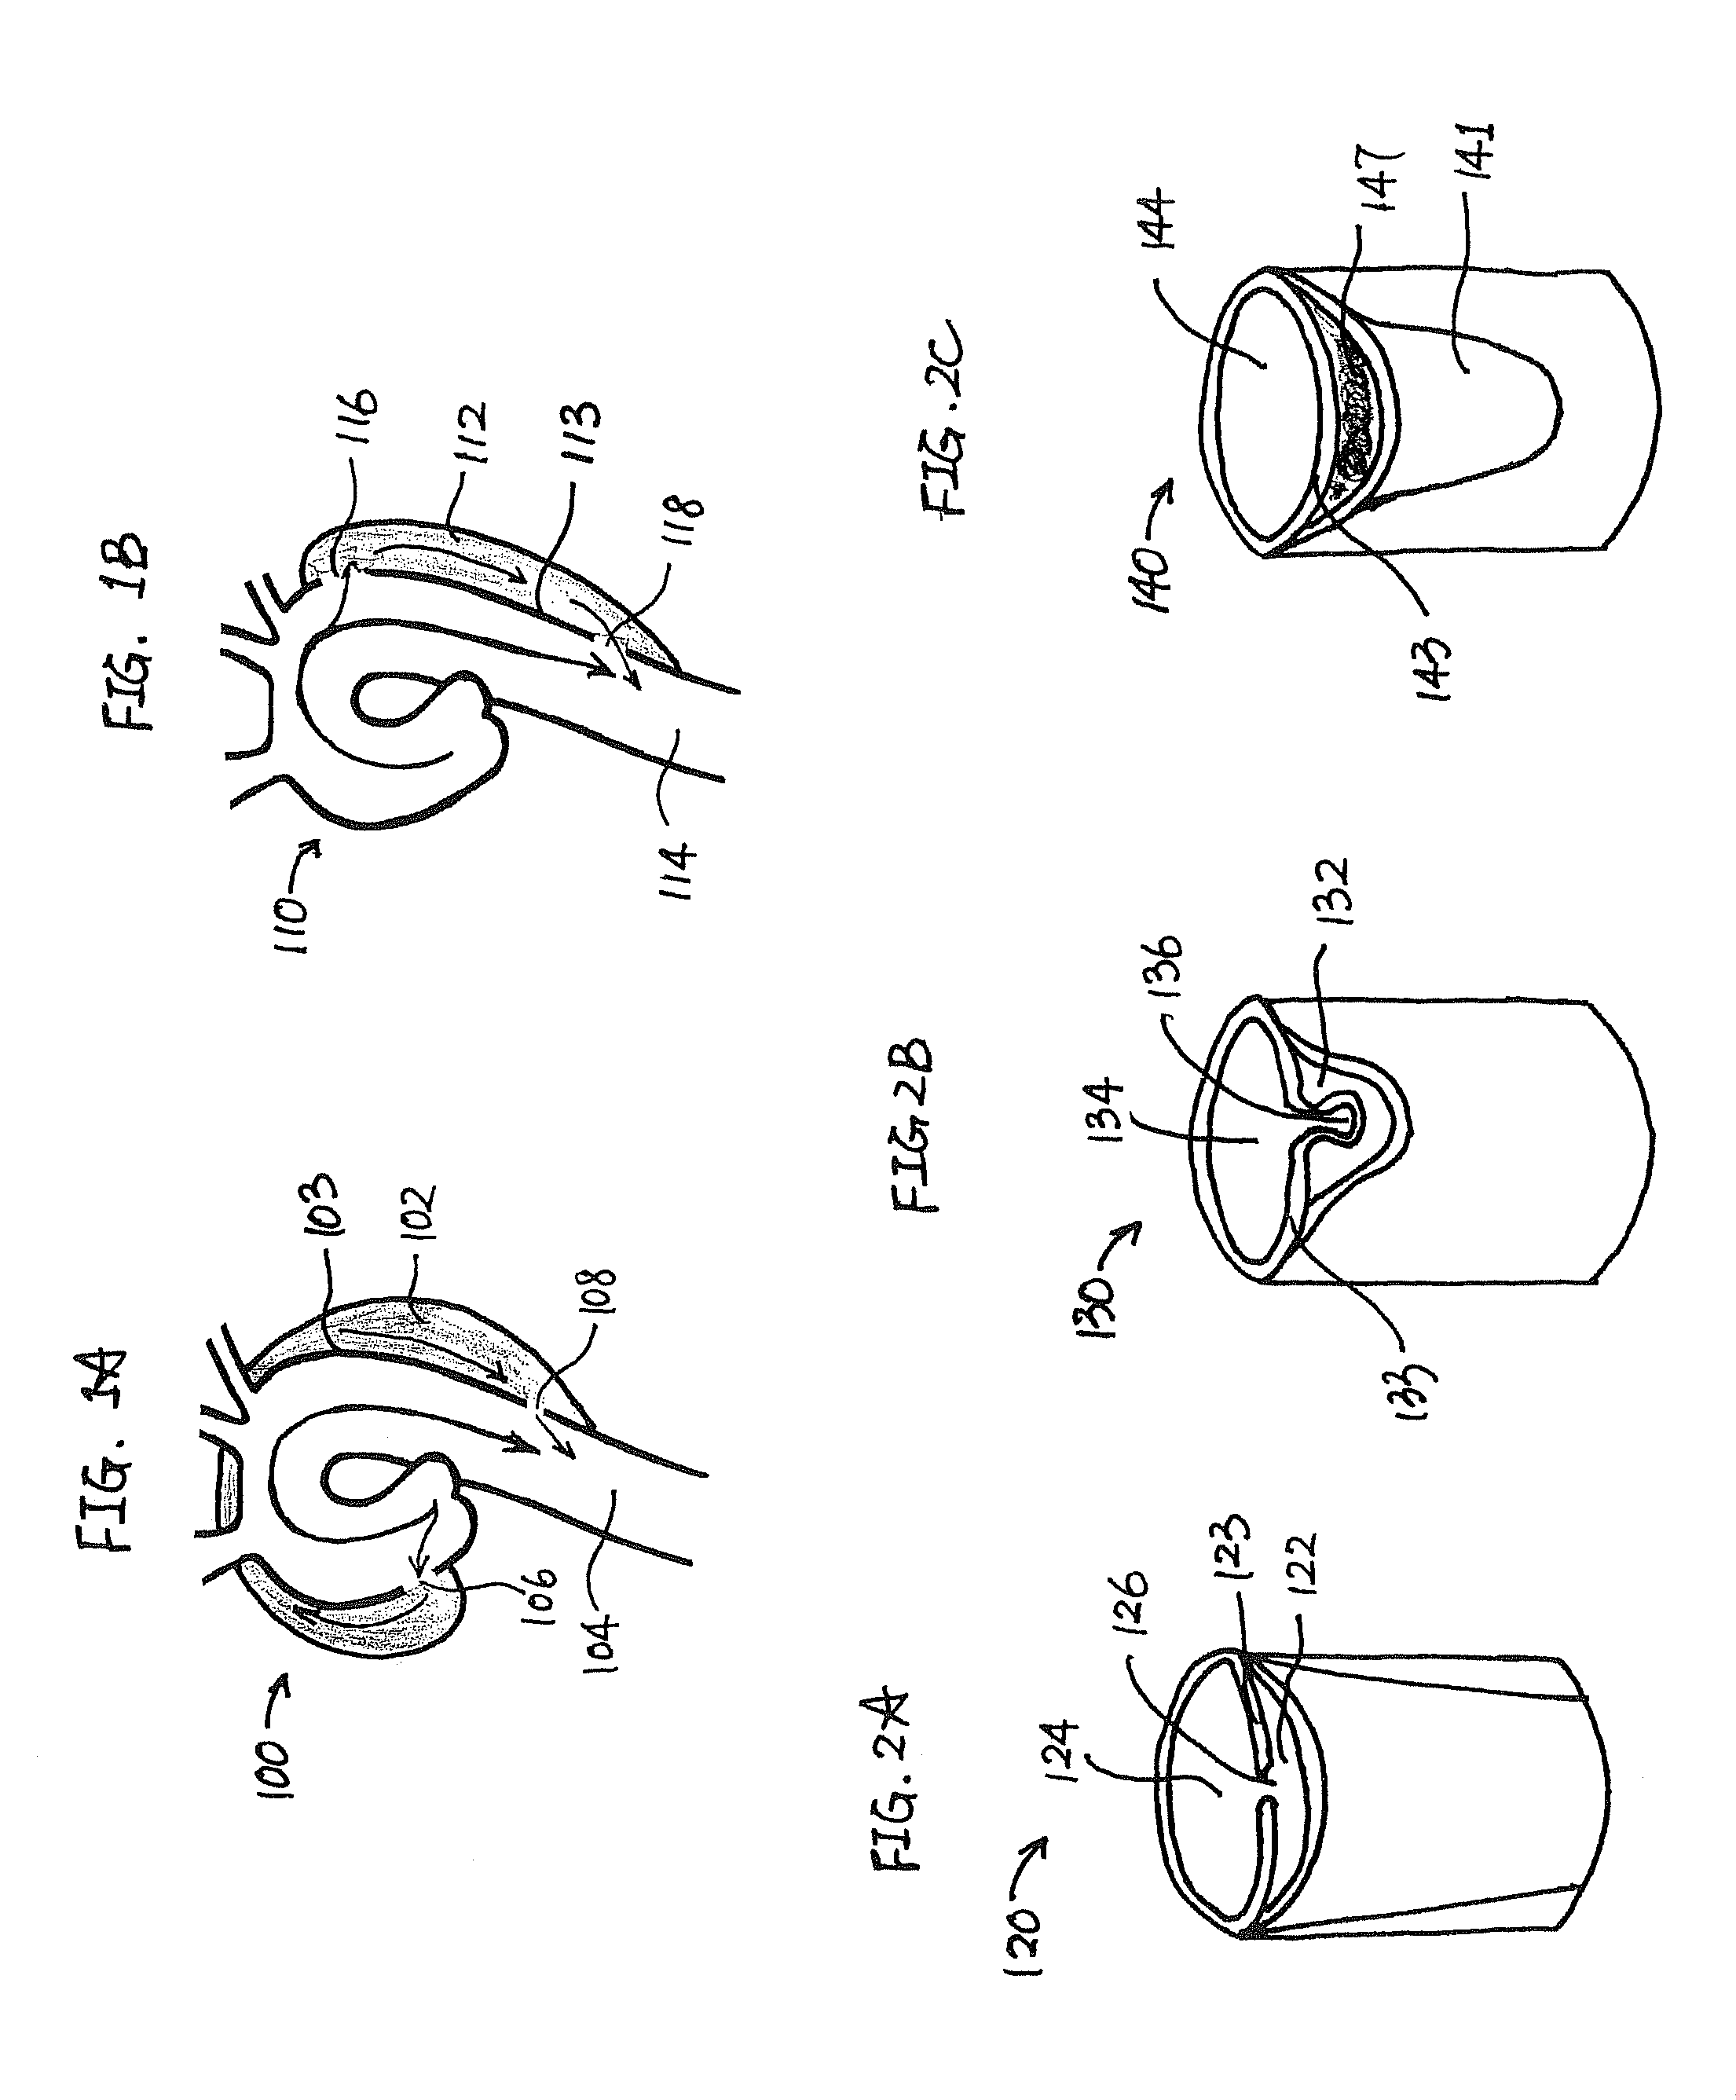 Devices, therapeutic compositions and corresponding percutaneous treatment methods for aortic dissection